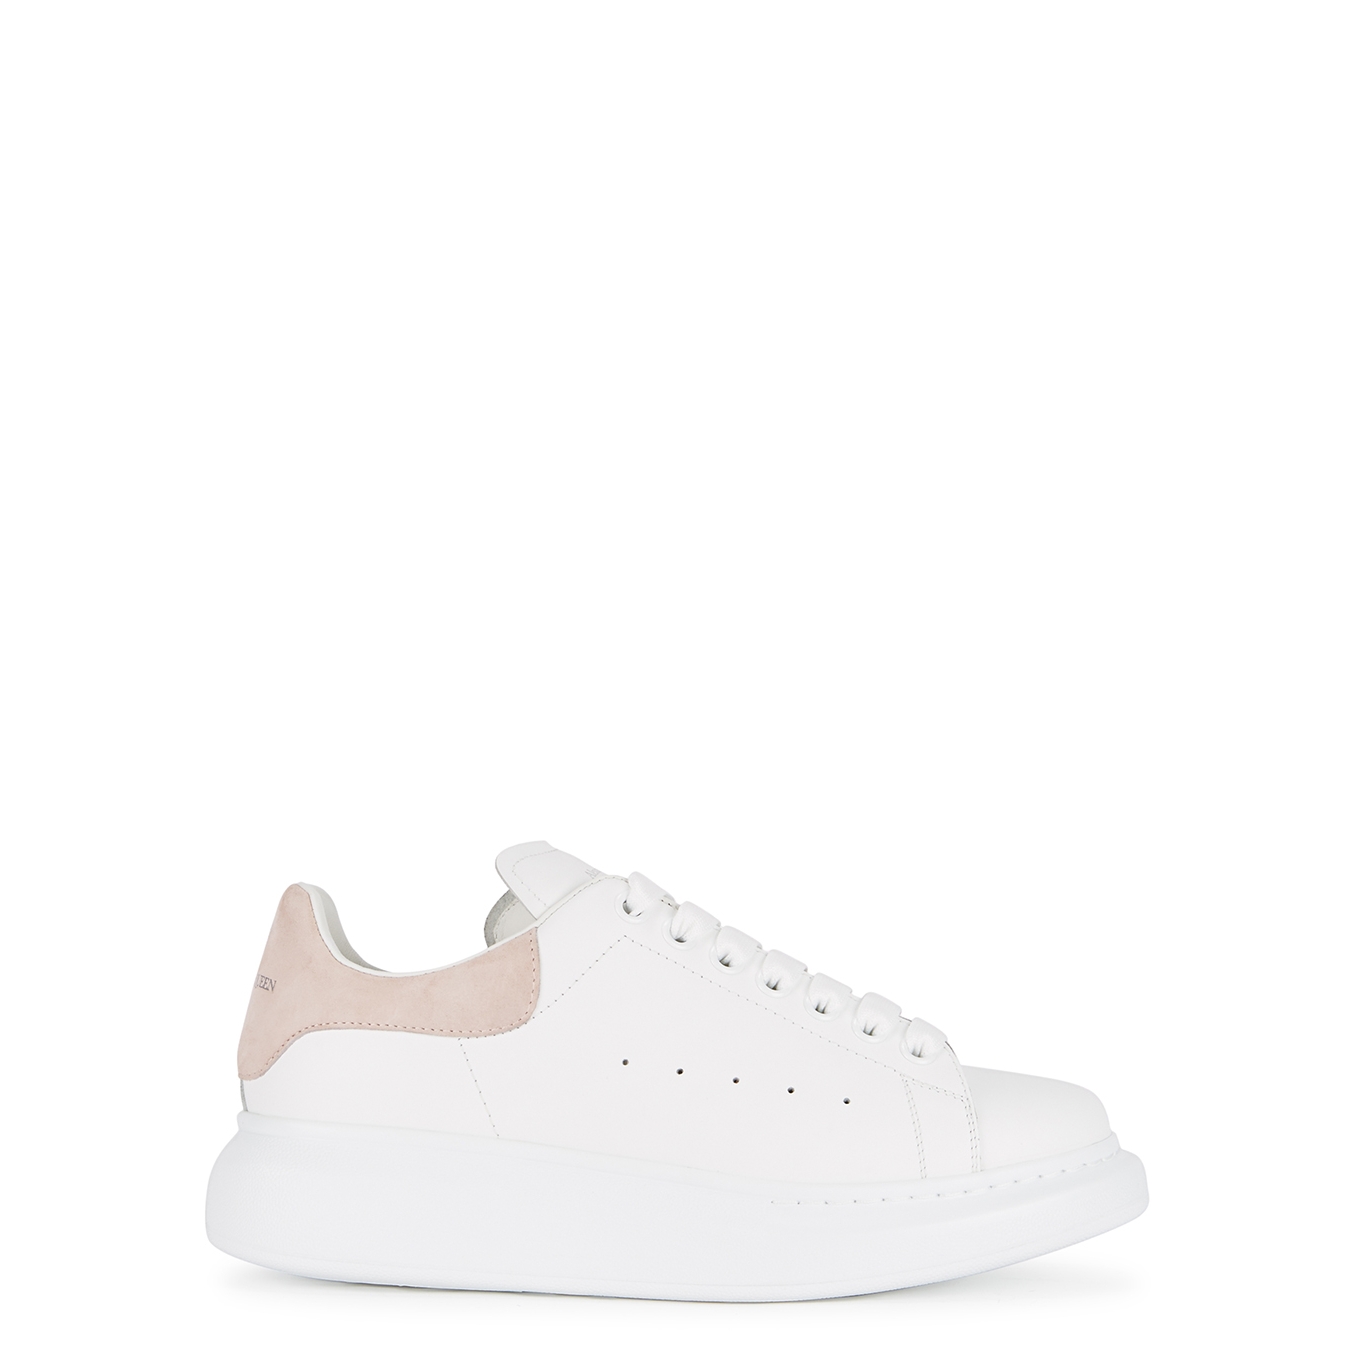 Alexander McQueen Oversized White Leather Sneakers, Sneakers, White - 6